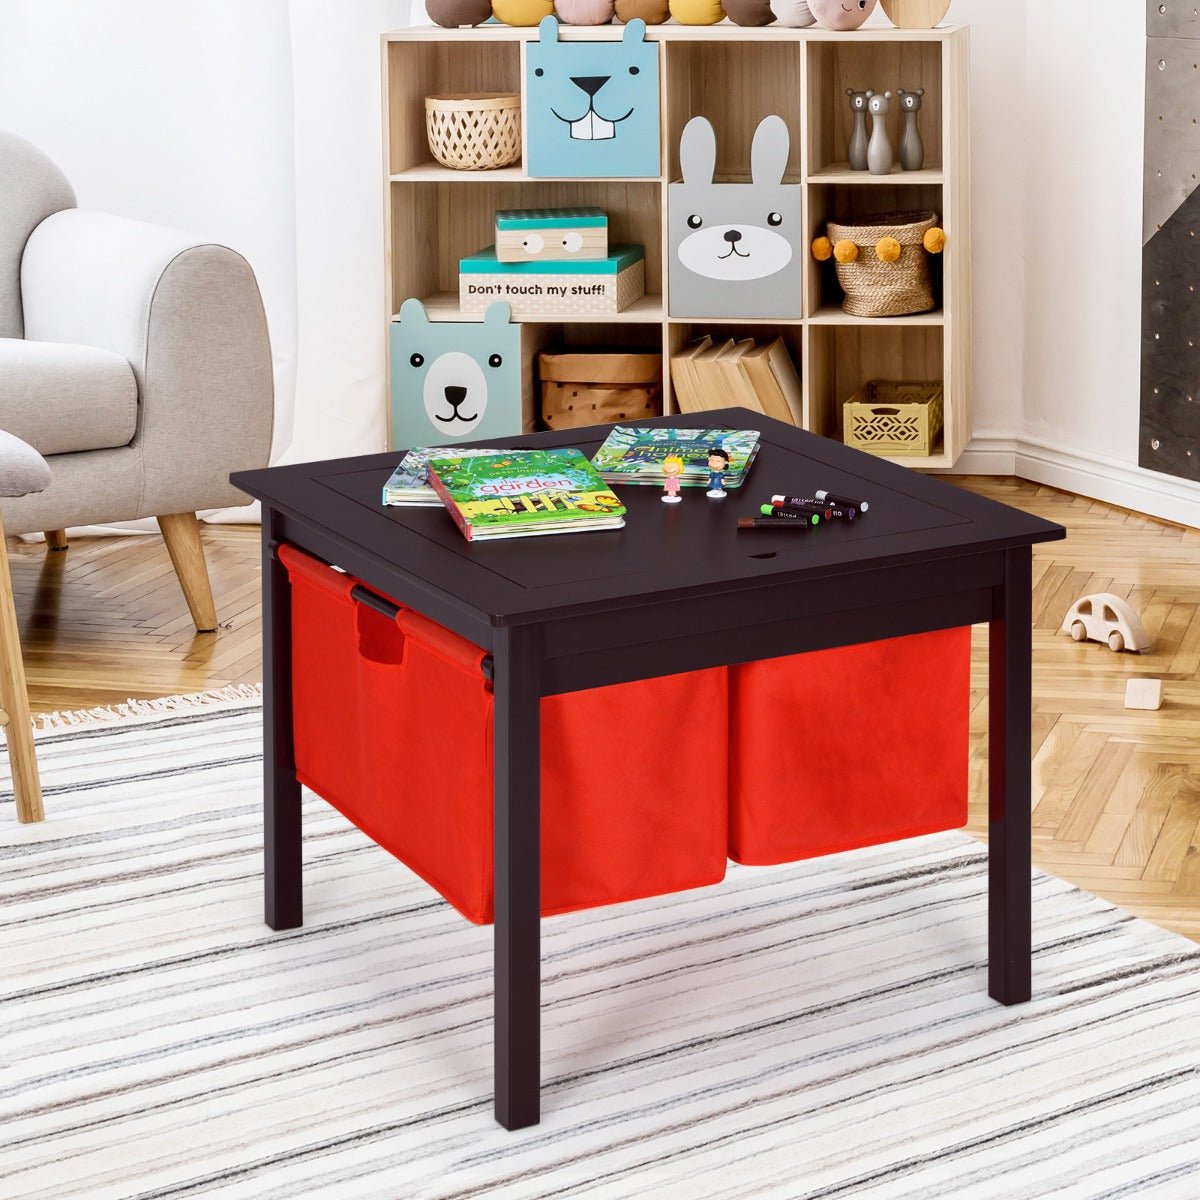 Espresso Kids Activity Table: Where Playfulness Meets Neatness